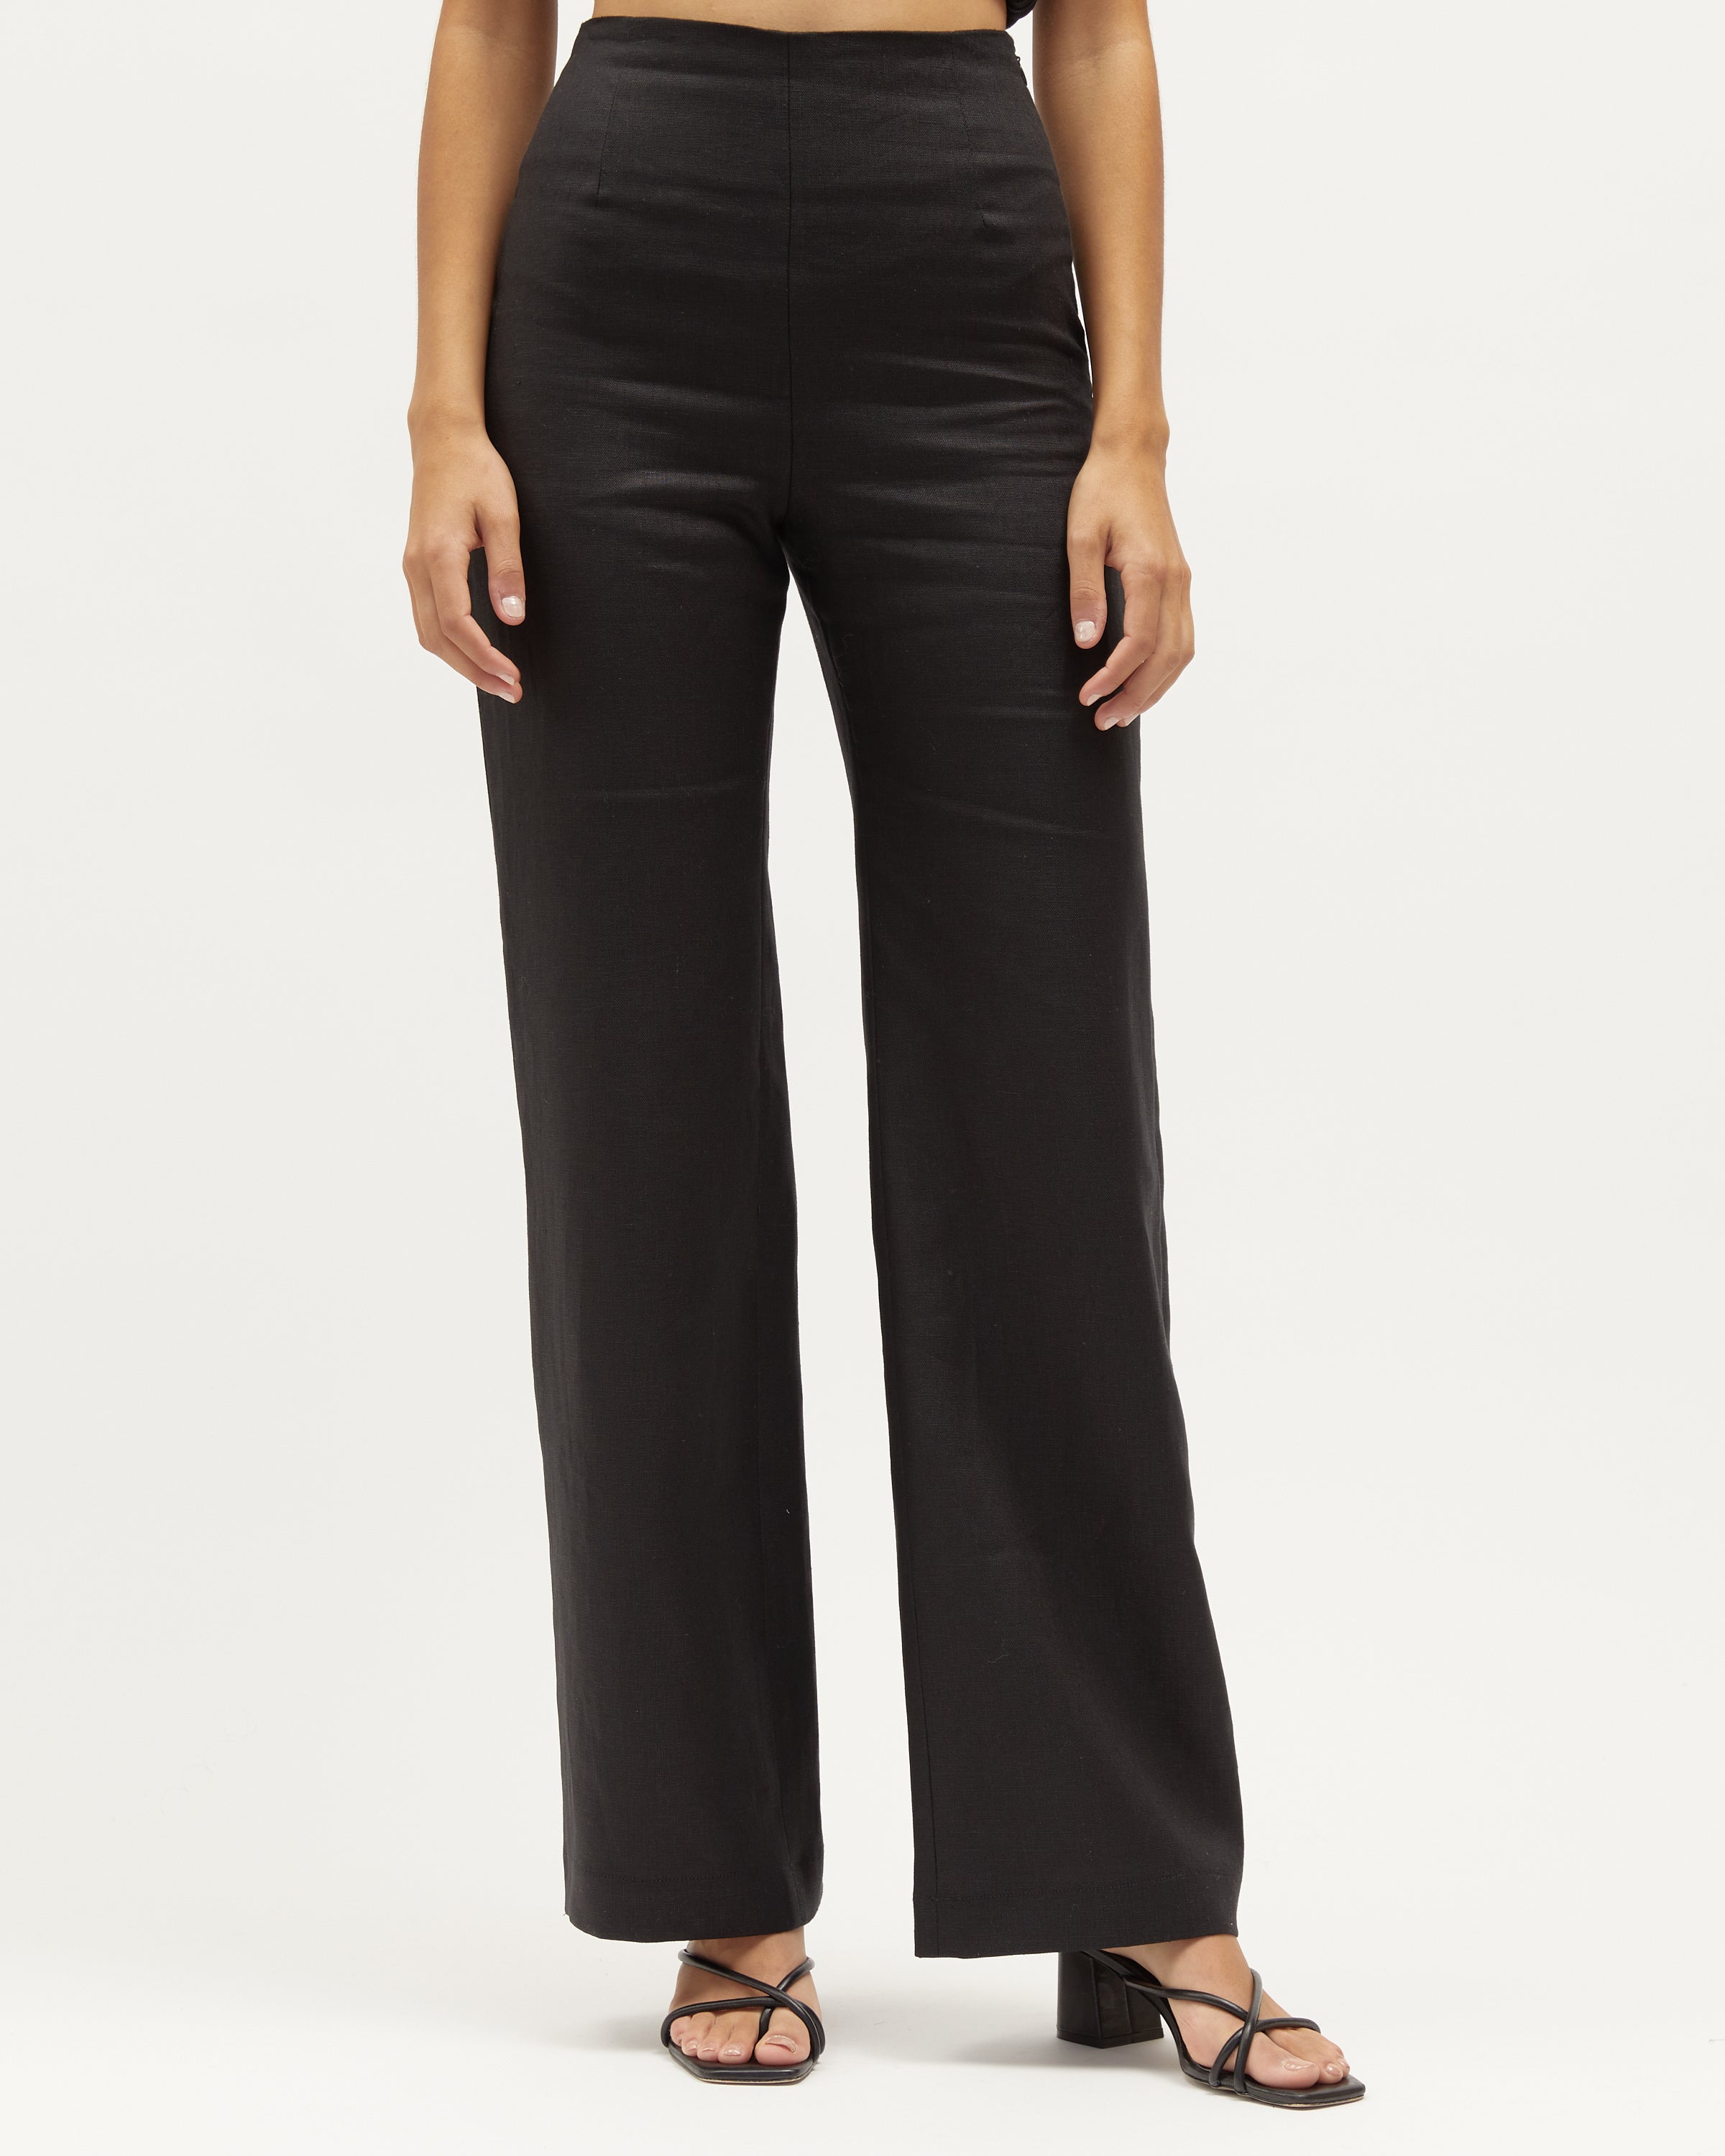 Sonia Pant | Black Heavy-Weight Linen $280